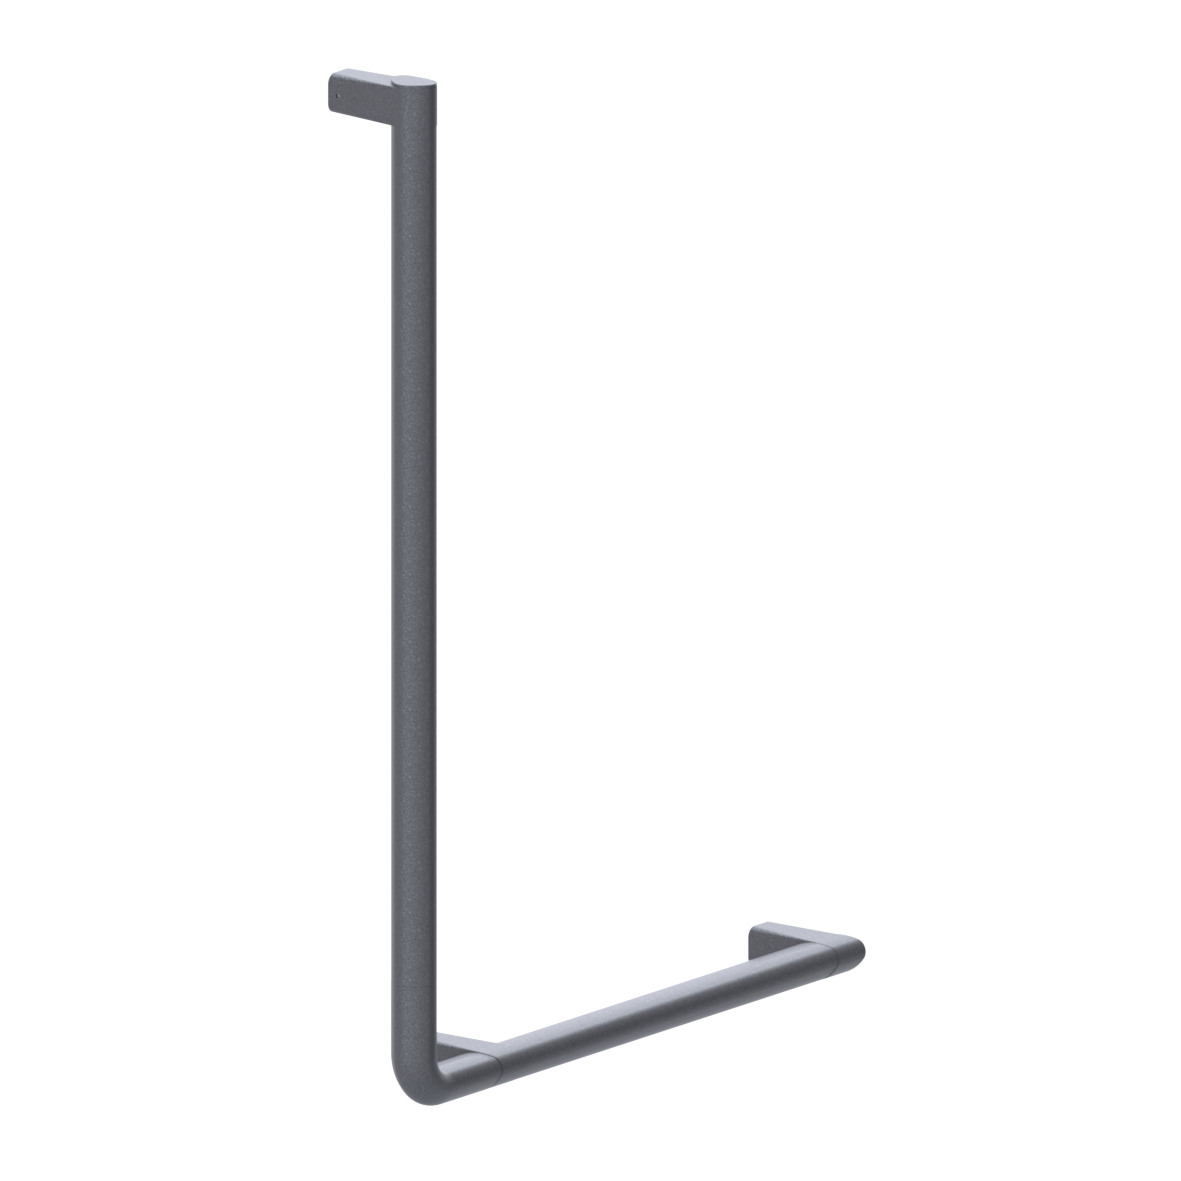 Cavere Care Grab rail, 90°, left, 500 x 750 mm, single-point mounting, Cavere Metallic anthracite